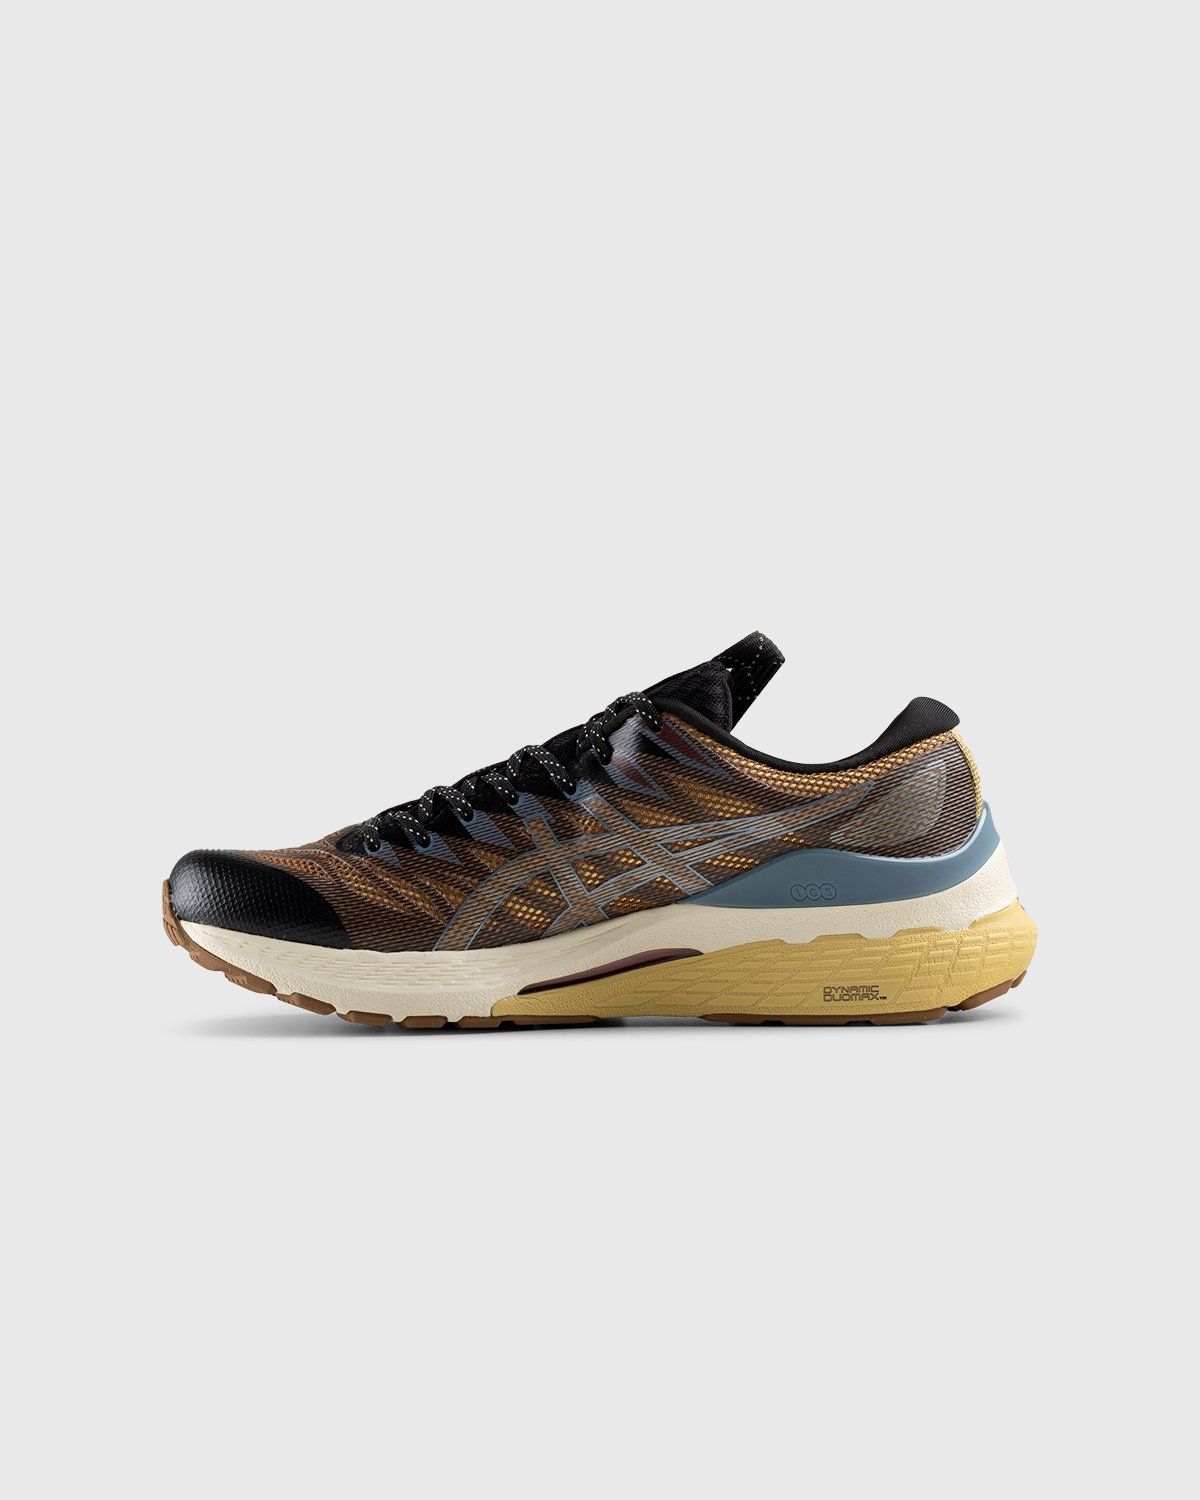 asics – FN3-S Gel Kayano 28 Anthracite/ Antique Gold - Sneakers - Yellow - Image 2